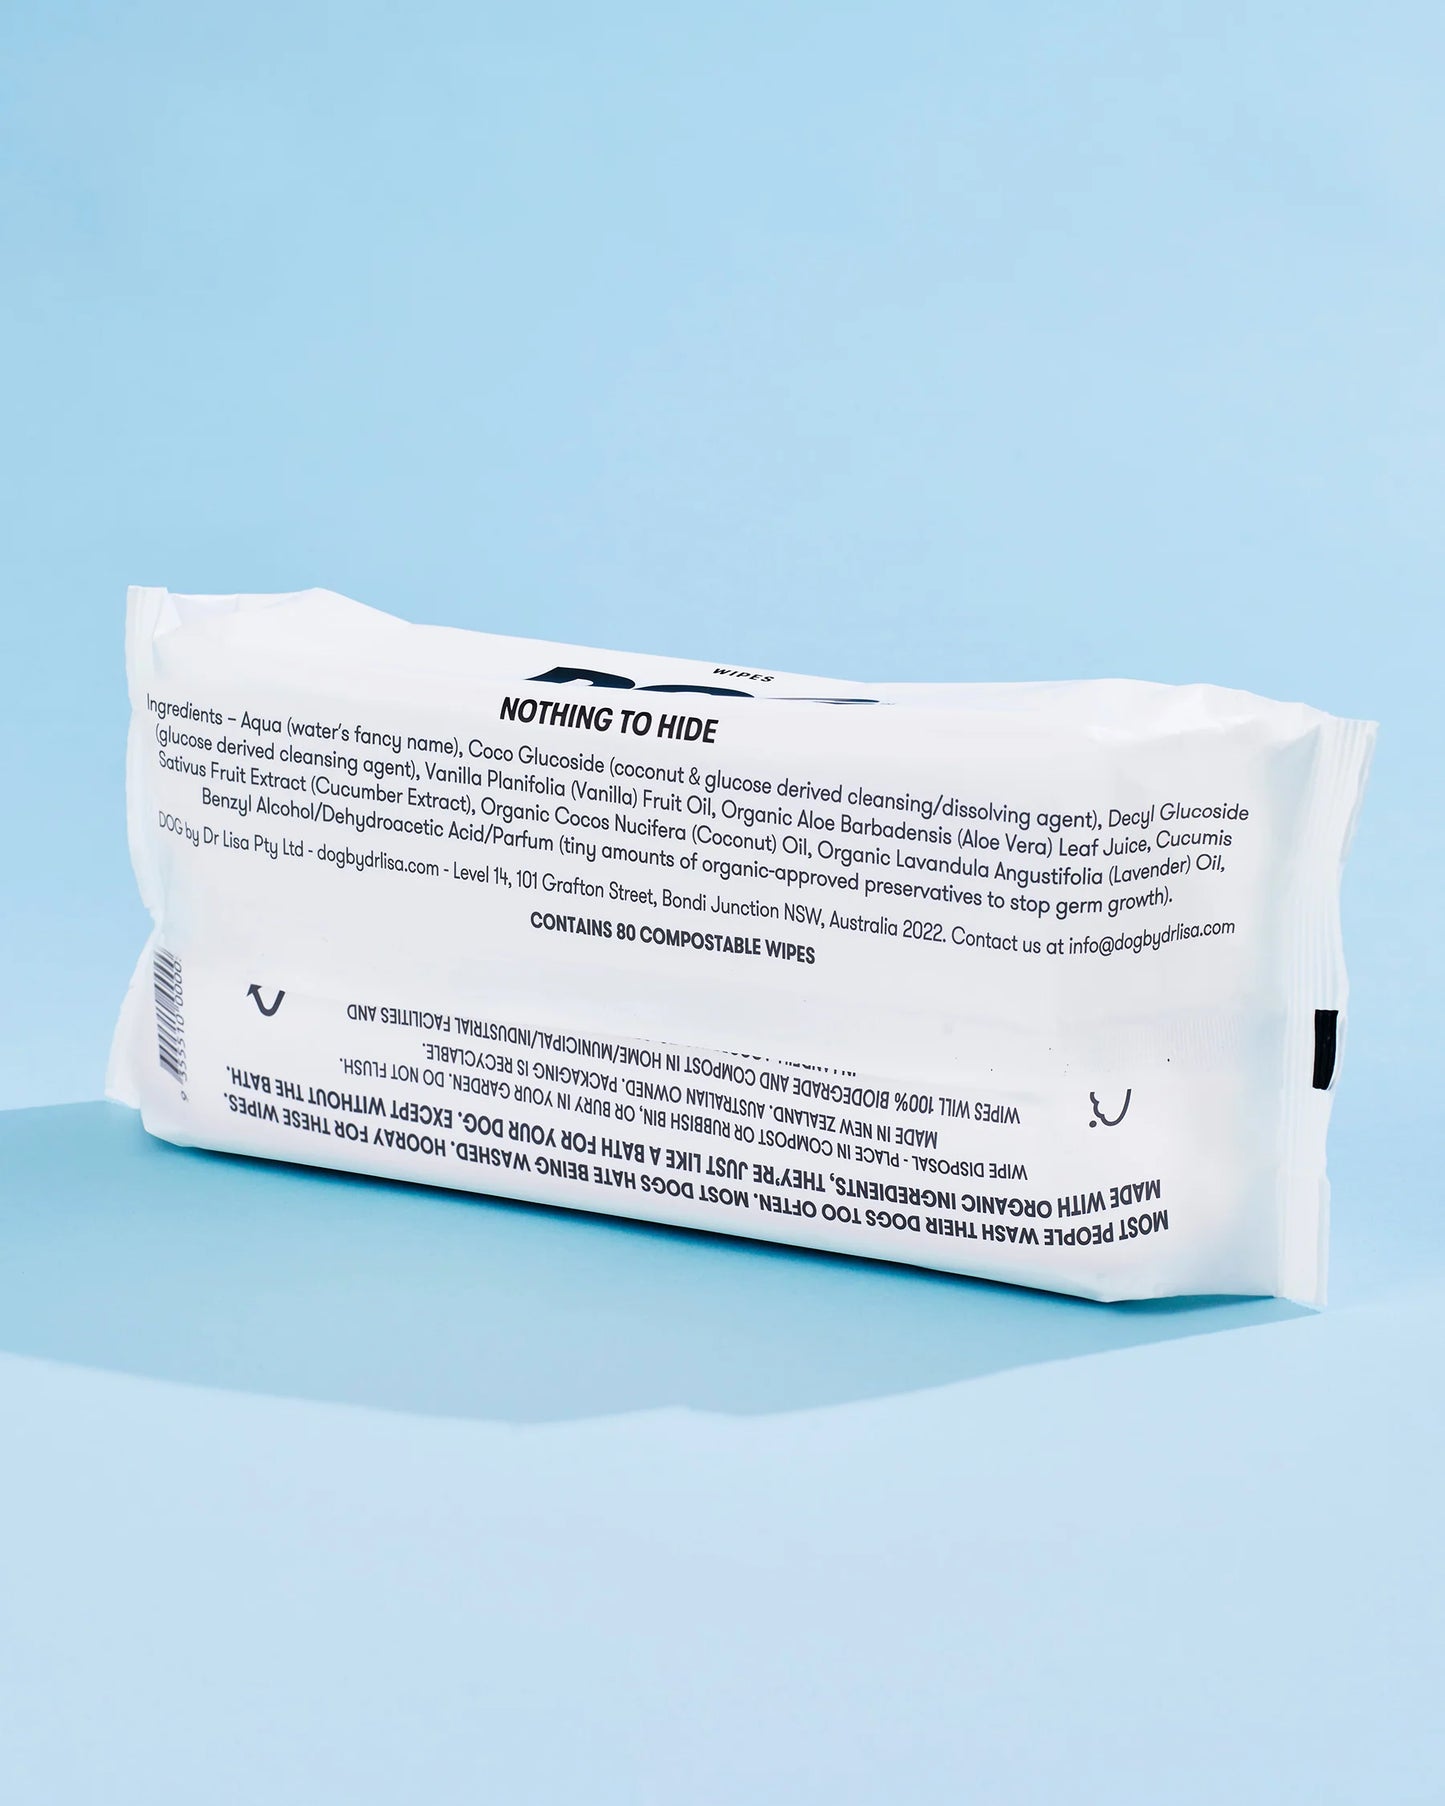 DOG Wipes by Dr Lisa